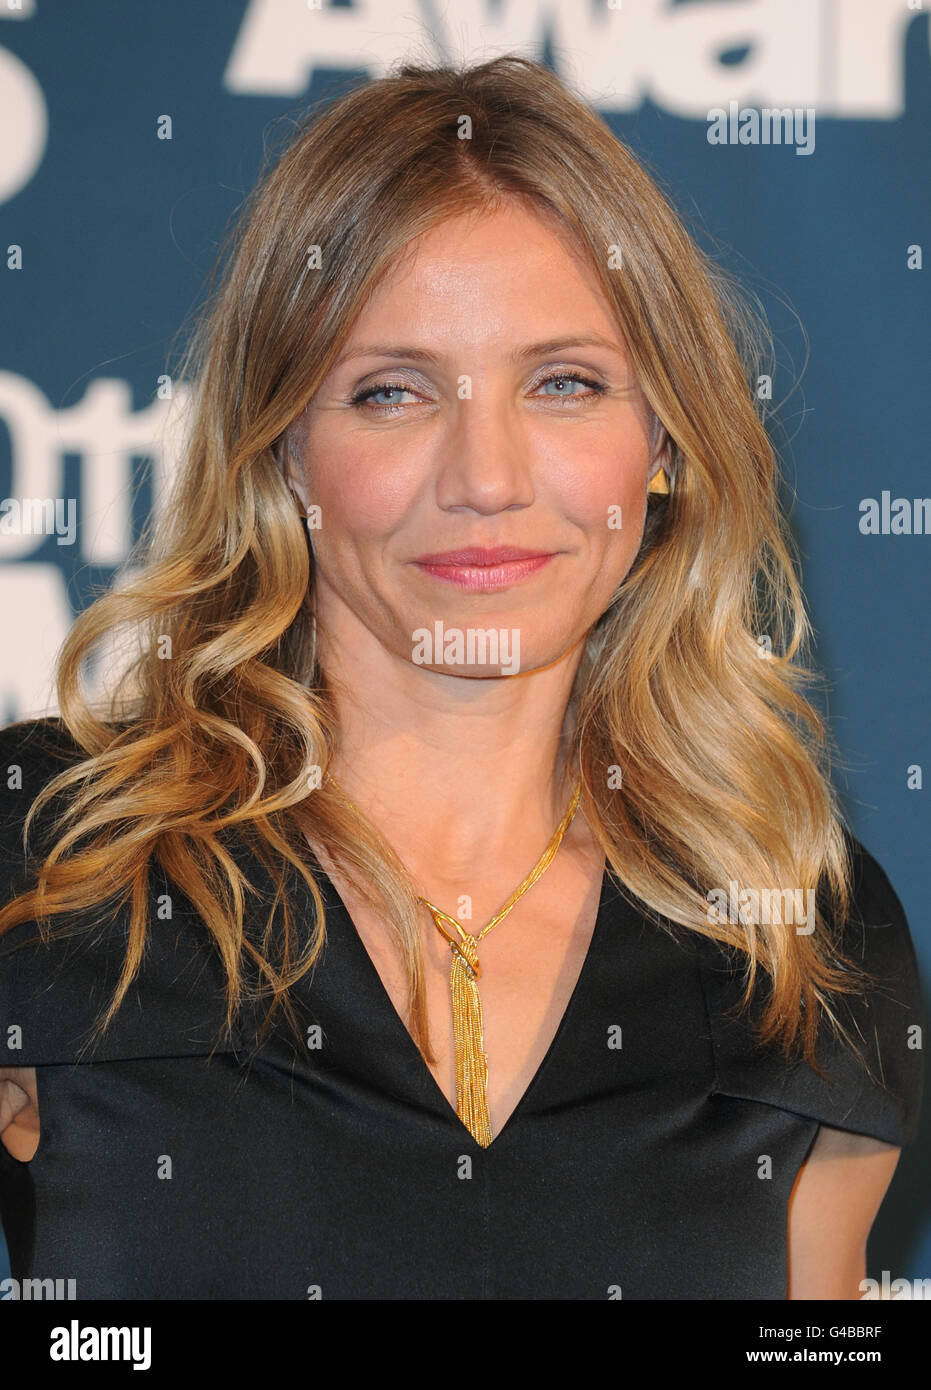 Cameron Diaz at the MTV Movie Awards 2011 at the Gibson Amphitheatre in Universal City, Los Angeles. Stock Photo